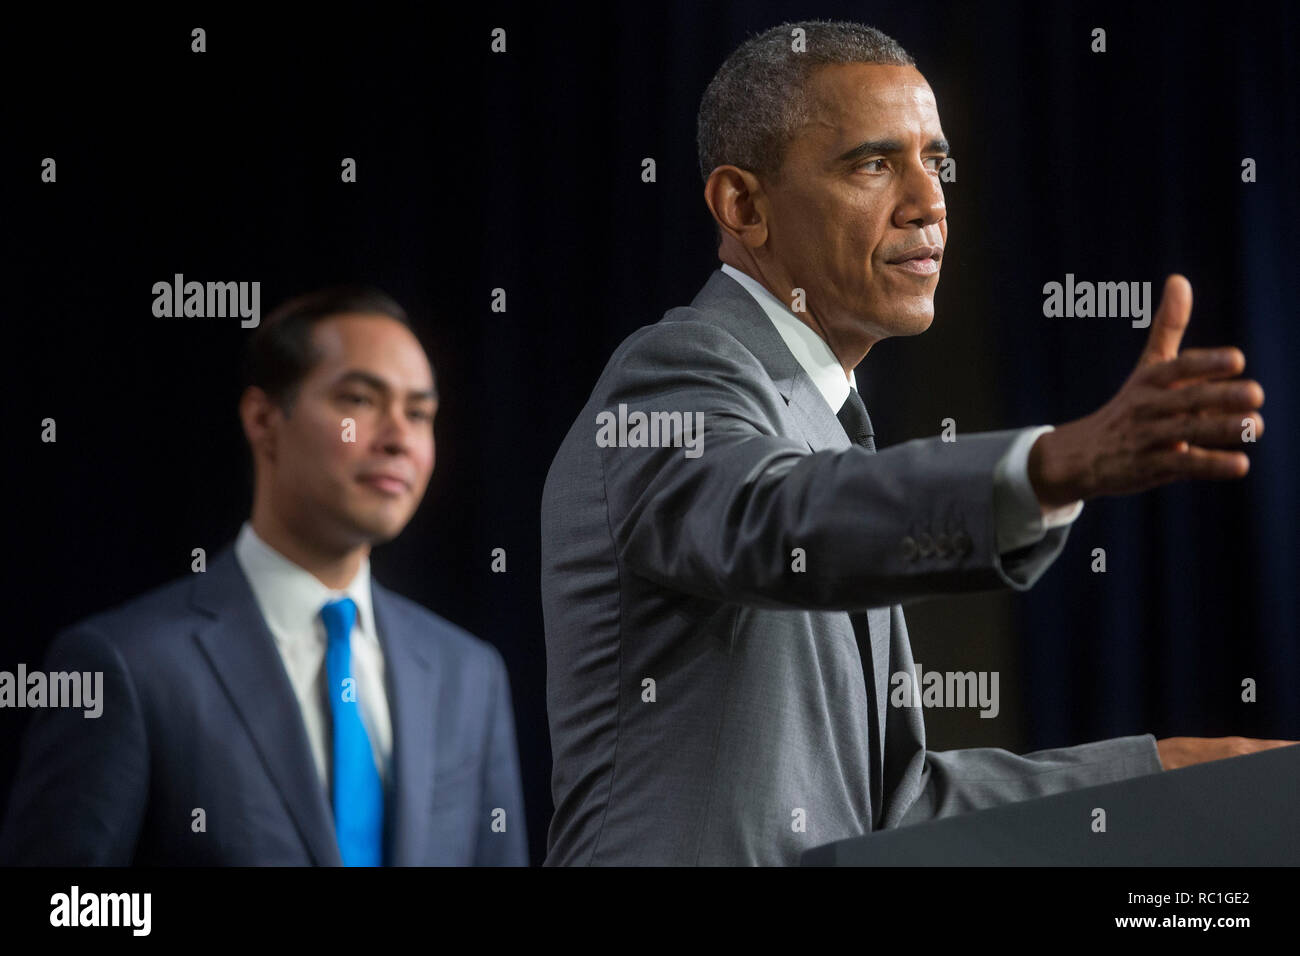 Washington, DC, USA. 31st July, 2014. United States President Barack Obama, right, speaks to employees at the Department of Housing and Urban Development with Julian Castro, Secretary of U.S. Housing and Urban Development (HUD), in Washington, DC, U.S., on Thursday, July 31, 2014. Castro, the former San Antonio, Texas mayor, was sworn in this week and will begin his duties on Monday, Aug. 4. Credit: Andrew Harrer/Pool via CNP | usage worldwide Credit: dpa/Alamy Live News Stock Photo